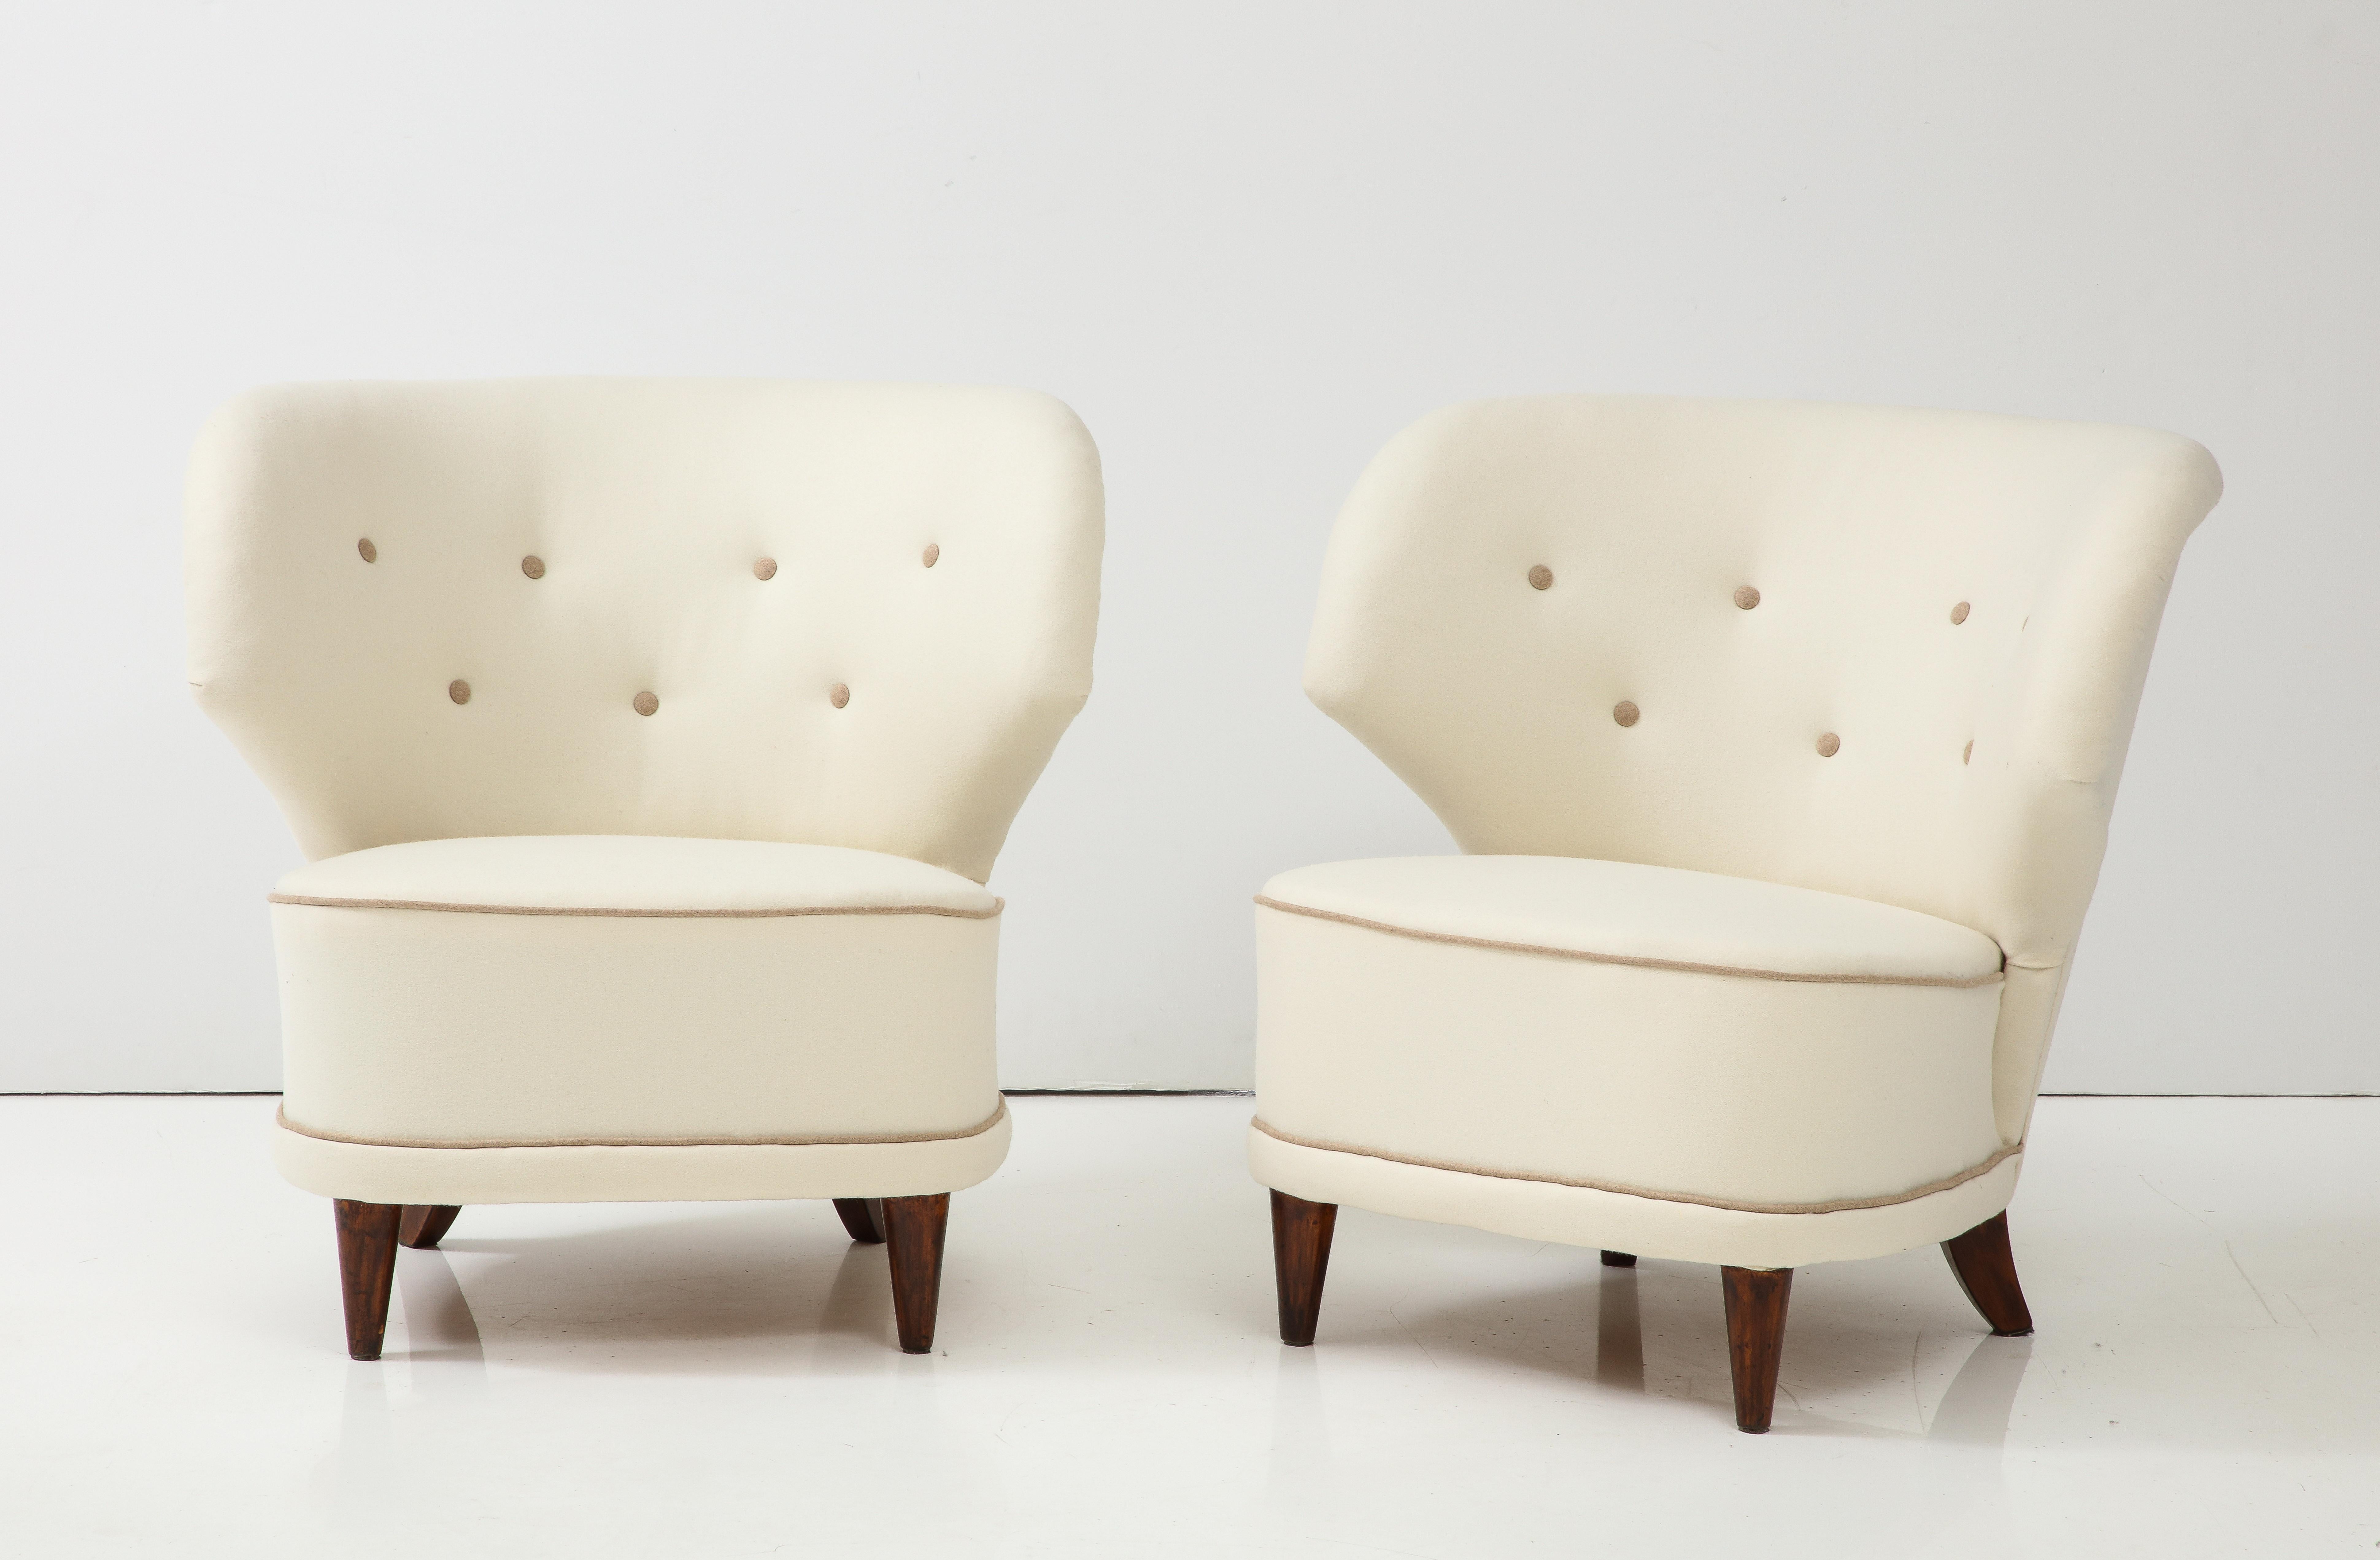 A pair of Carl-Johan Boman club chairs, Finland, Circa 1940s, with curved and angular backrests, upholstered rounded seat raised on turned and tapered legs. New off-white wool upholstery. Produced by Oy Boman Ab